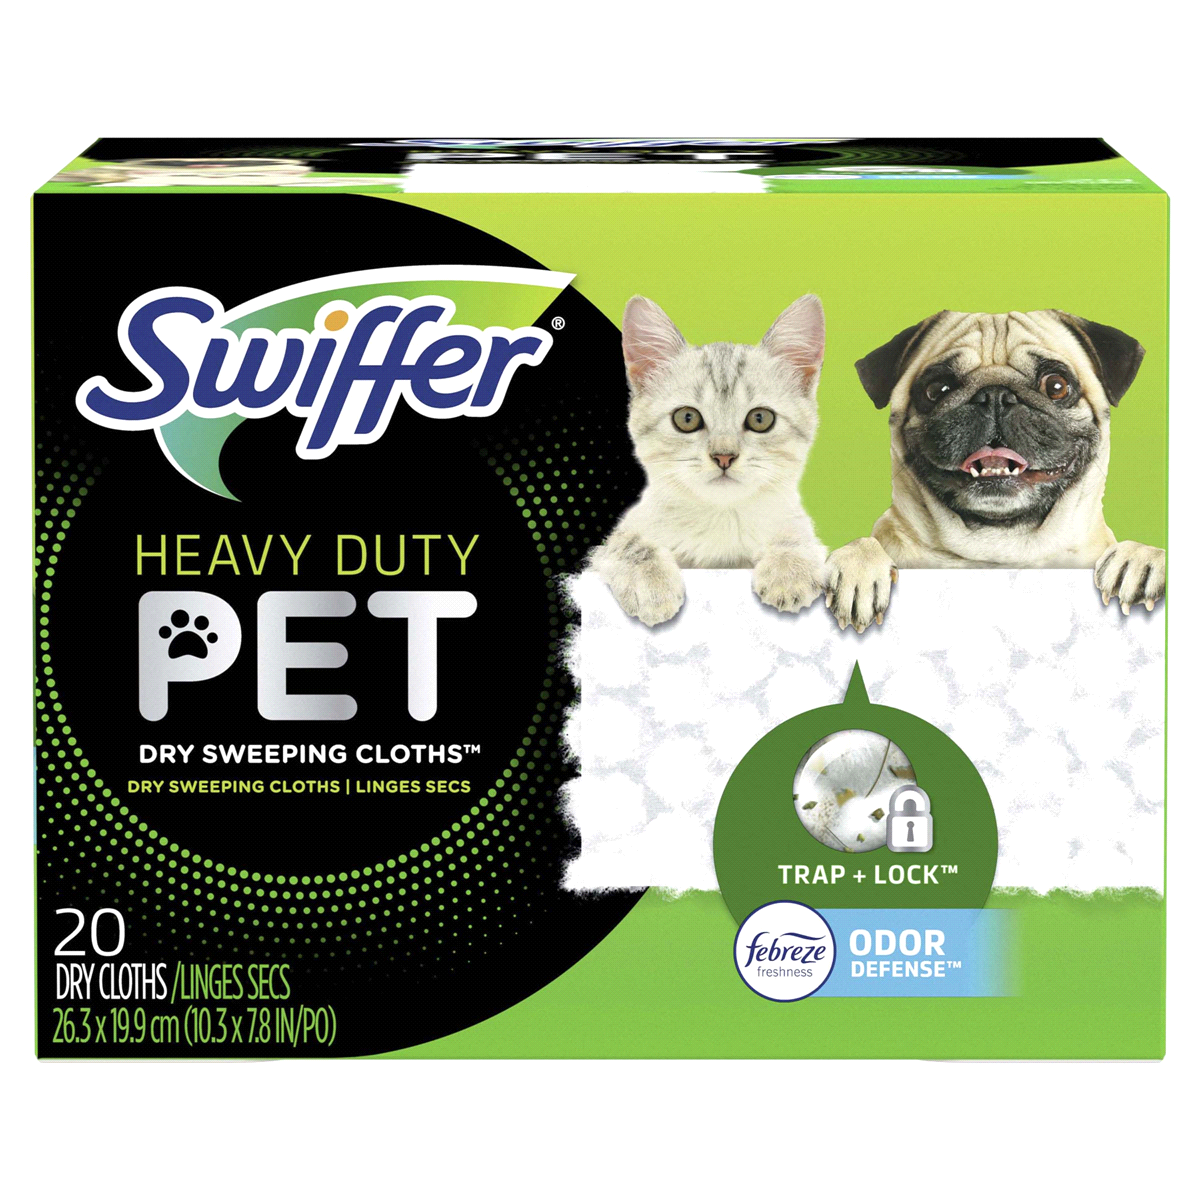 slide 1 of 2, Swiffer Heavy Duty Pet, Dry Sweeping Cloth With Febreze Odor Defense, 20 ct